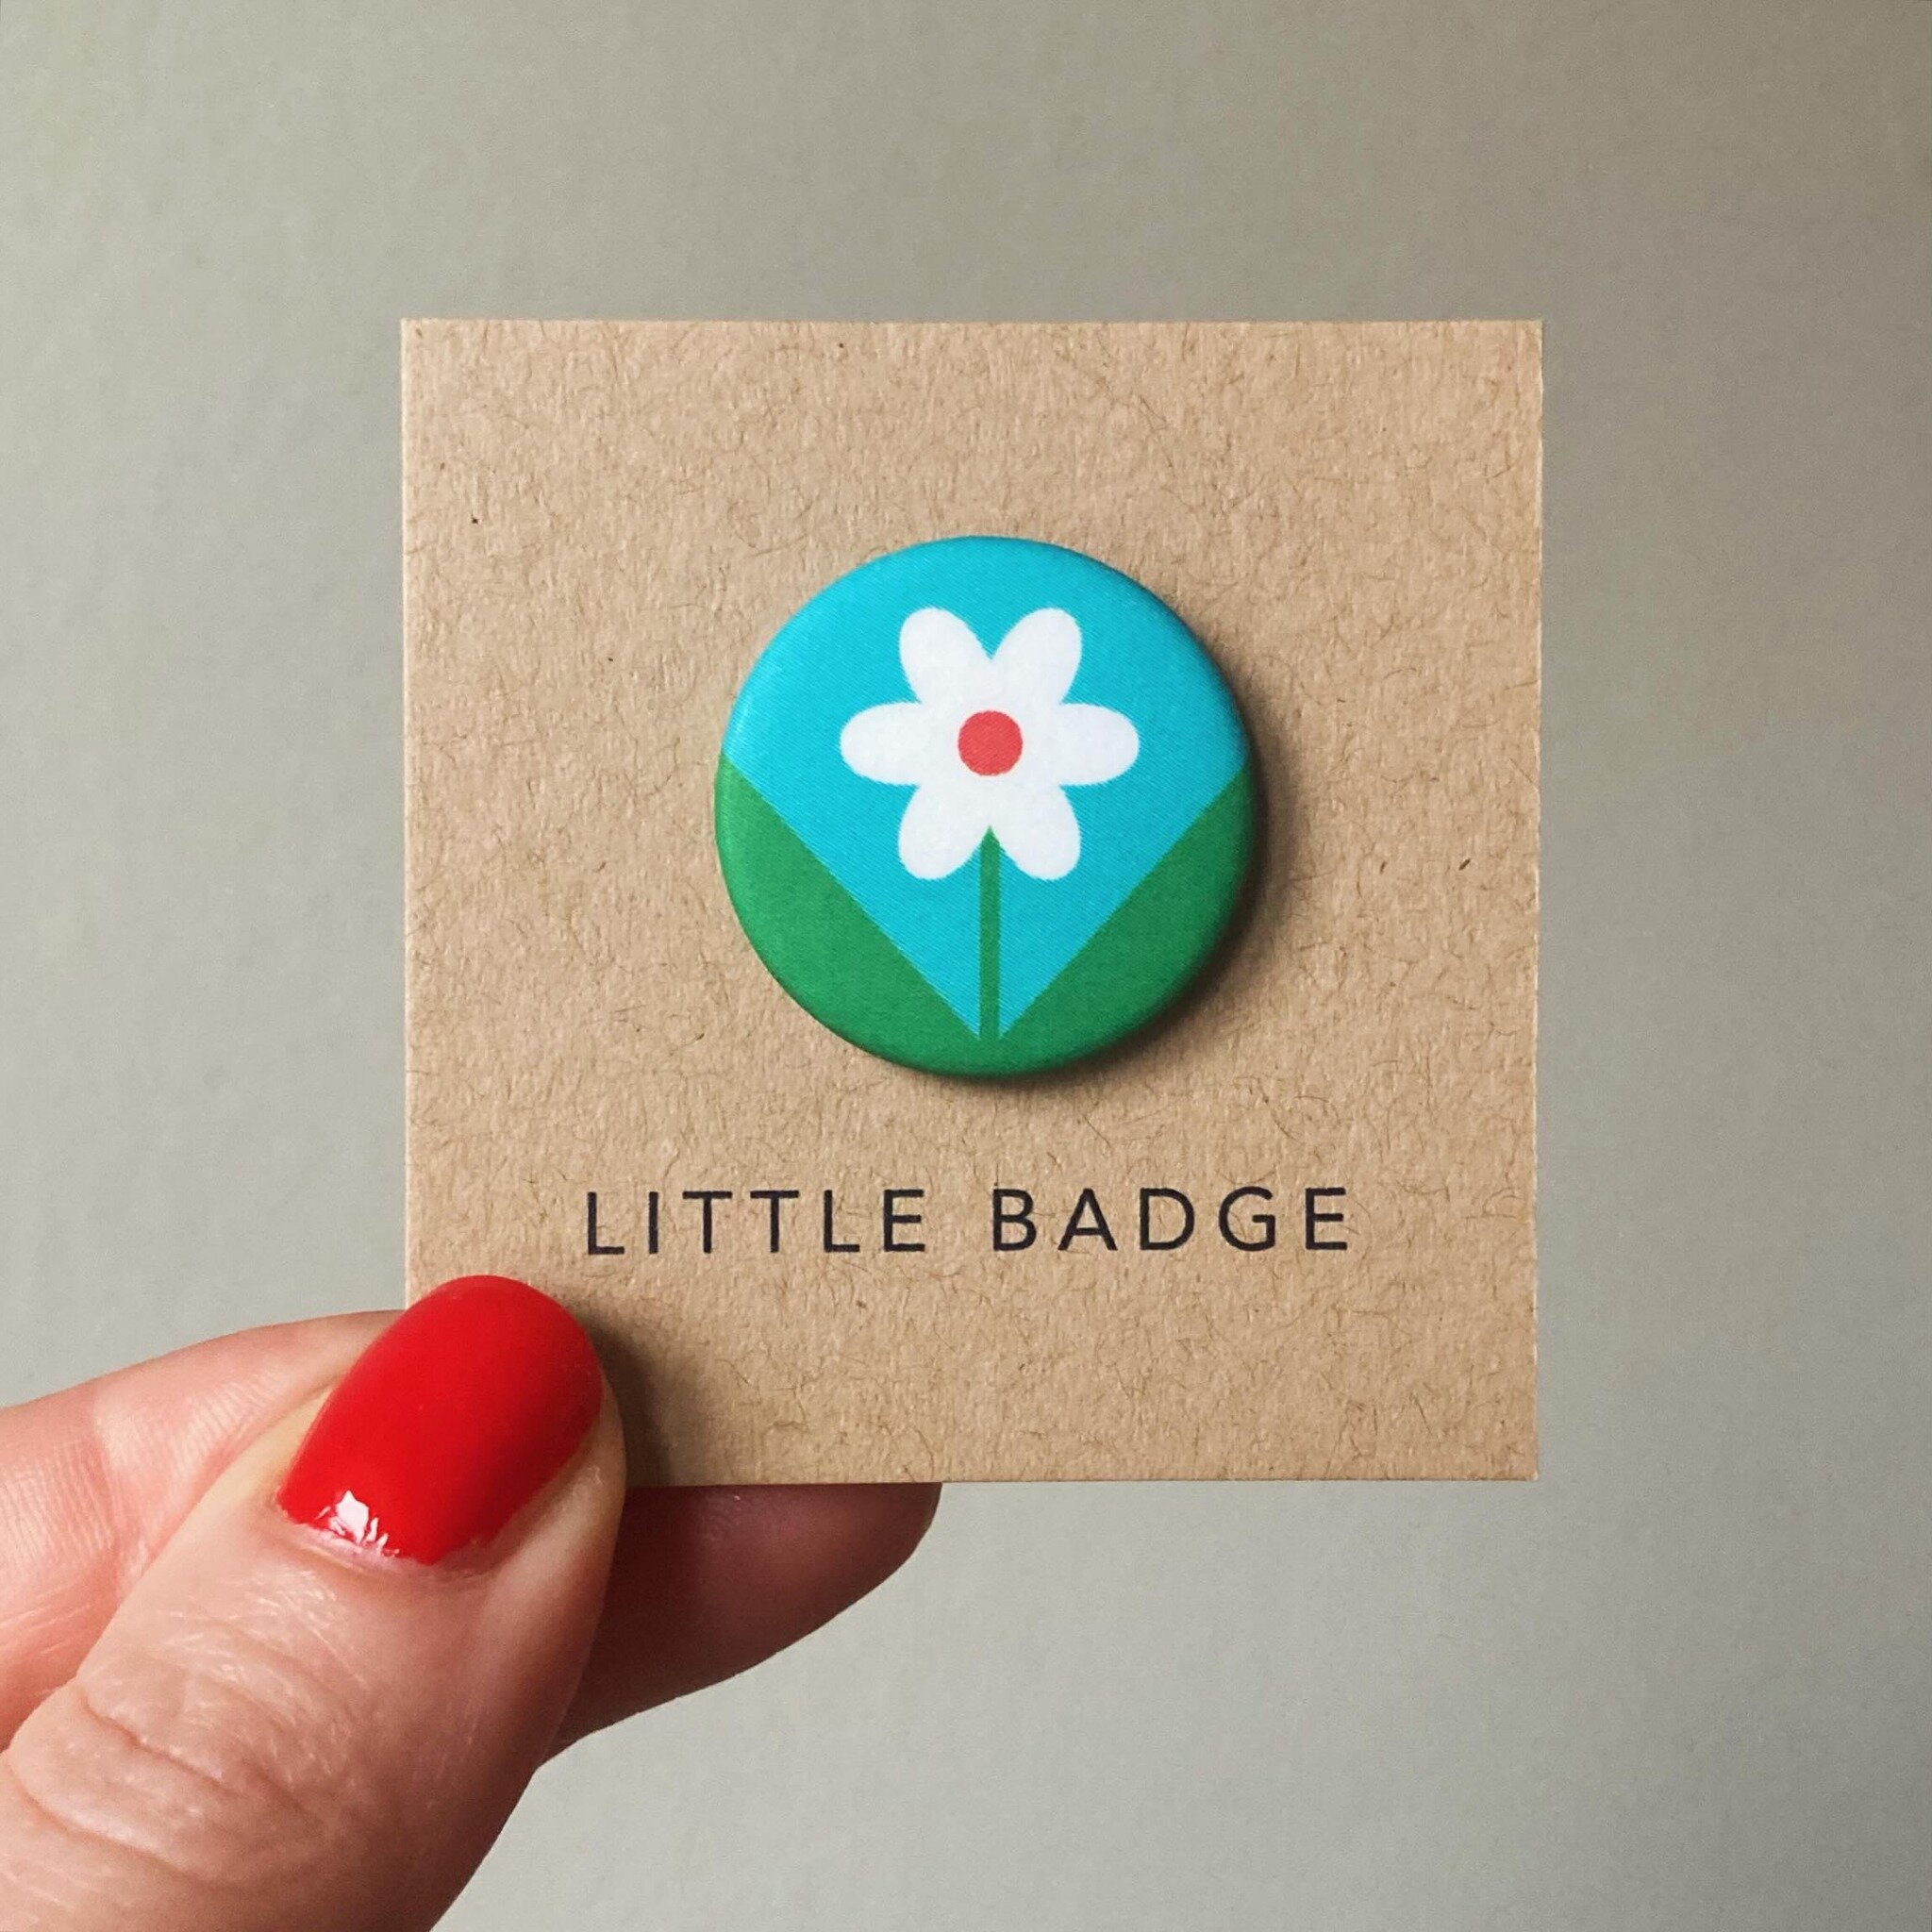 ⭐️ N E W ⭐️

Little Floret - a bright new addition to the range of Little Badges. 
4 colourways to choose from, with a contemporary matte finish

Now available on the website 

&bull;
&bull;
&bull;
&bull;
&bull;
#littlebadges 
#fiutslittlebadge 
#lit